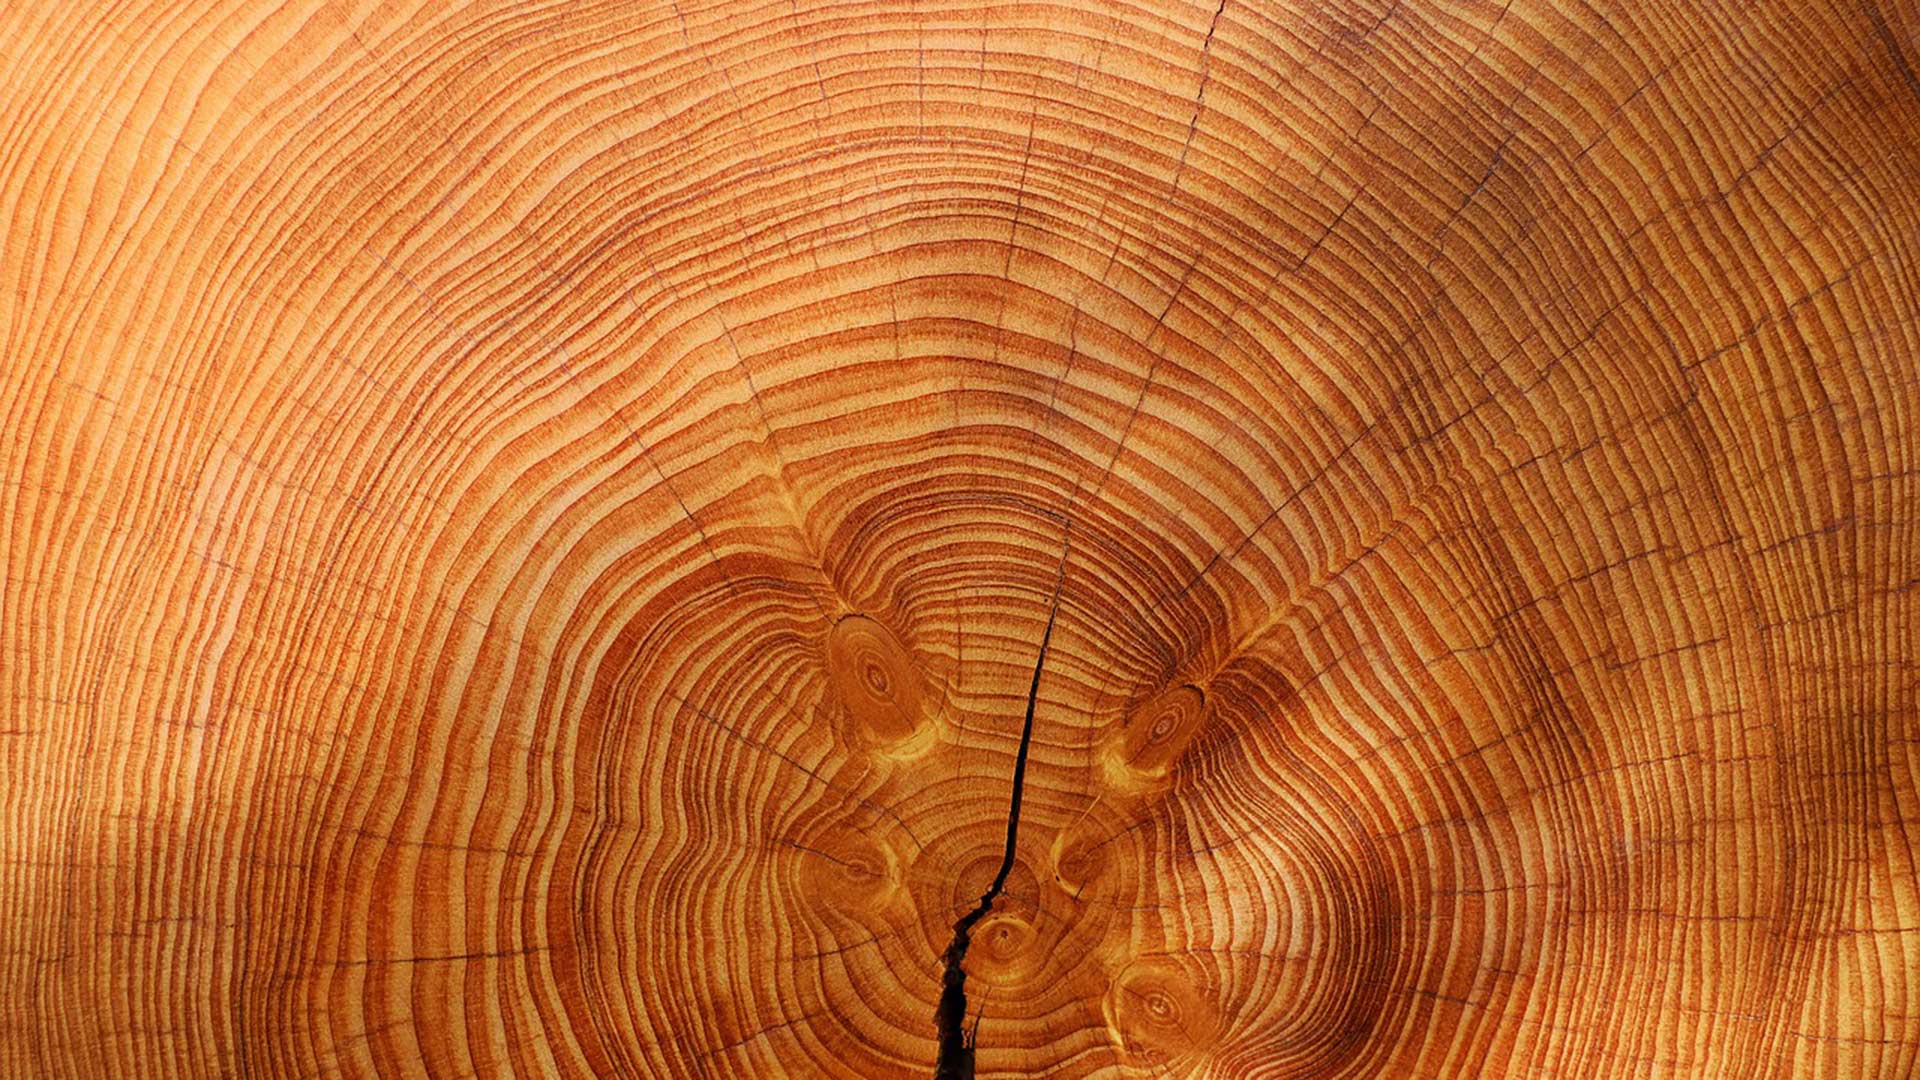 Studying tree rings helped UA researchers track the movement of the tropics over 800 years.